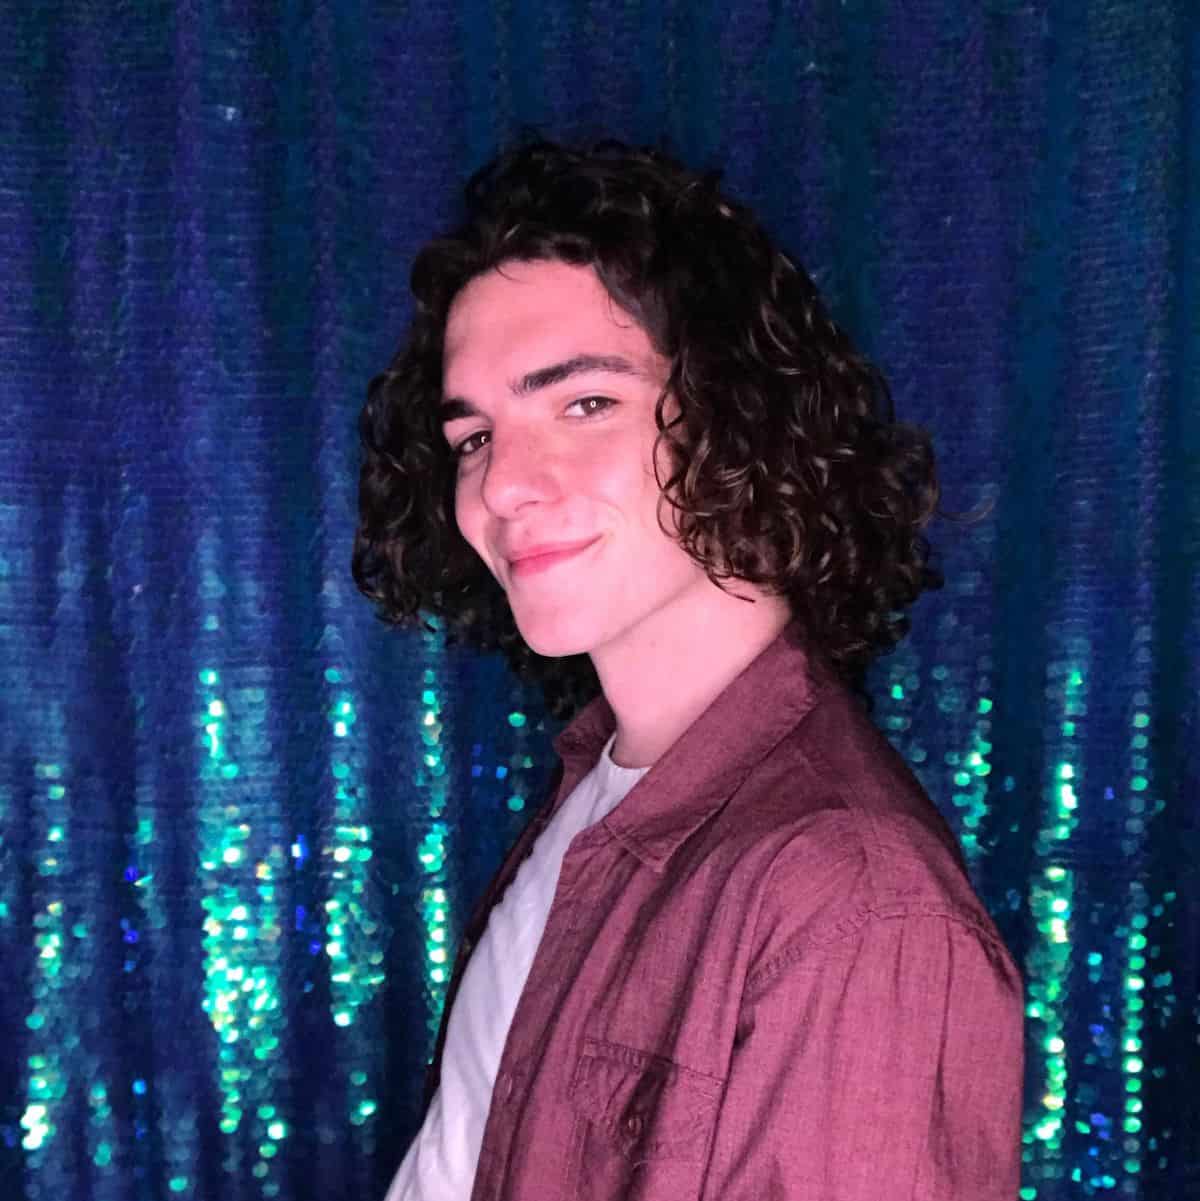 A young man smiling for his photo booth photo against a sequin backdrop